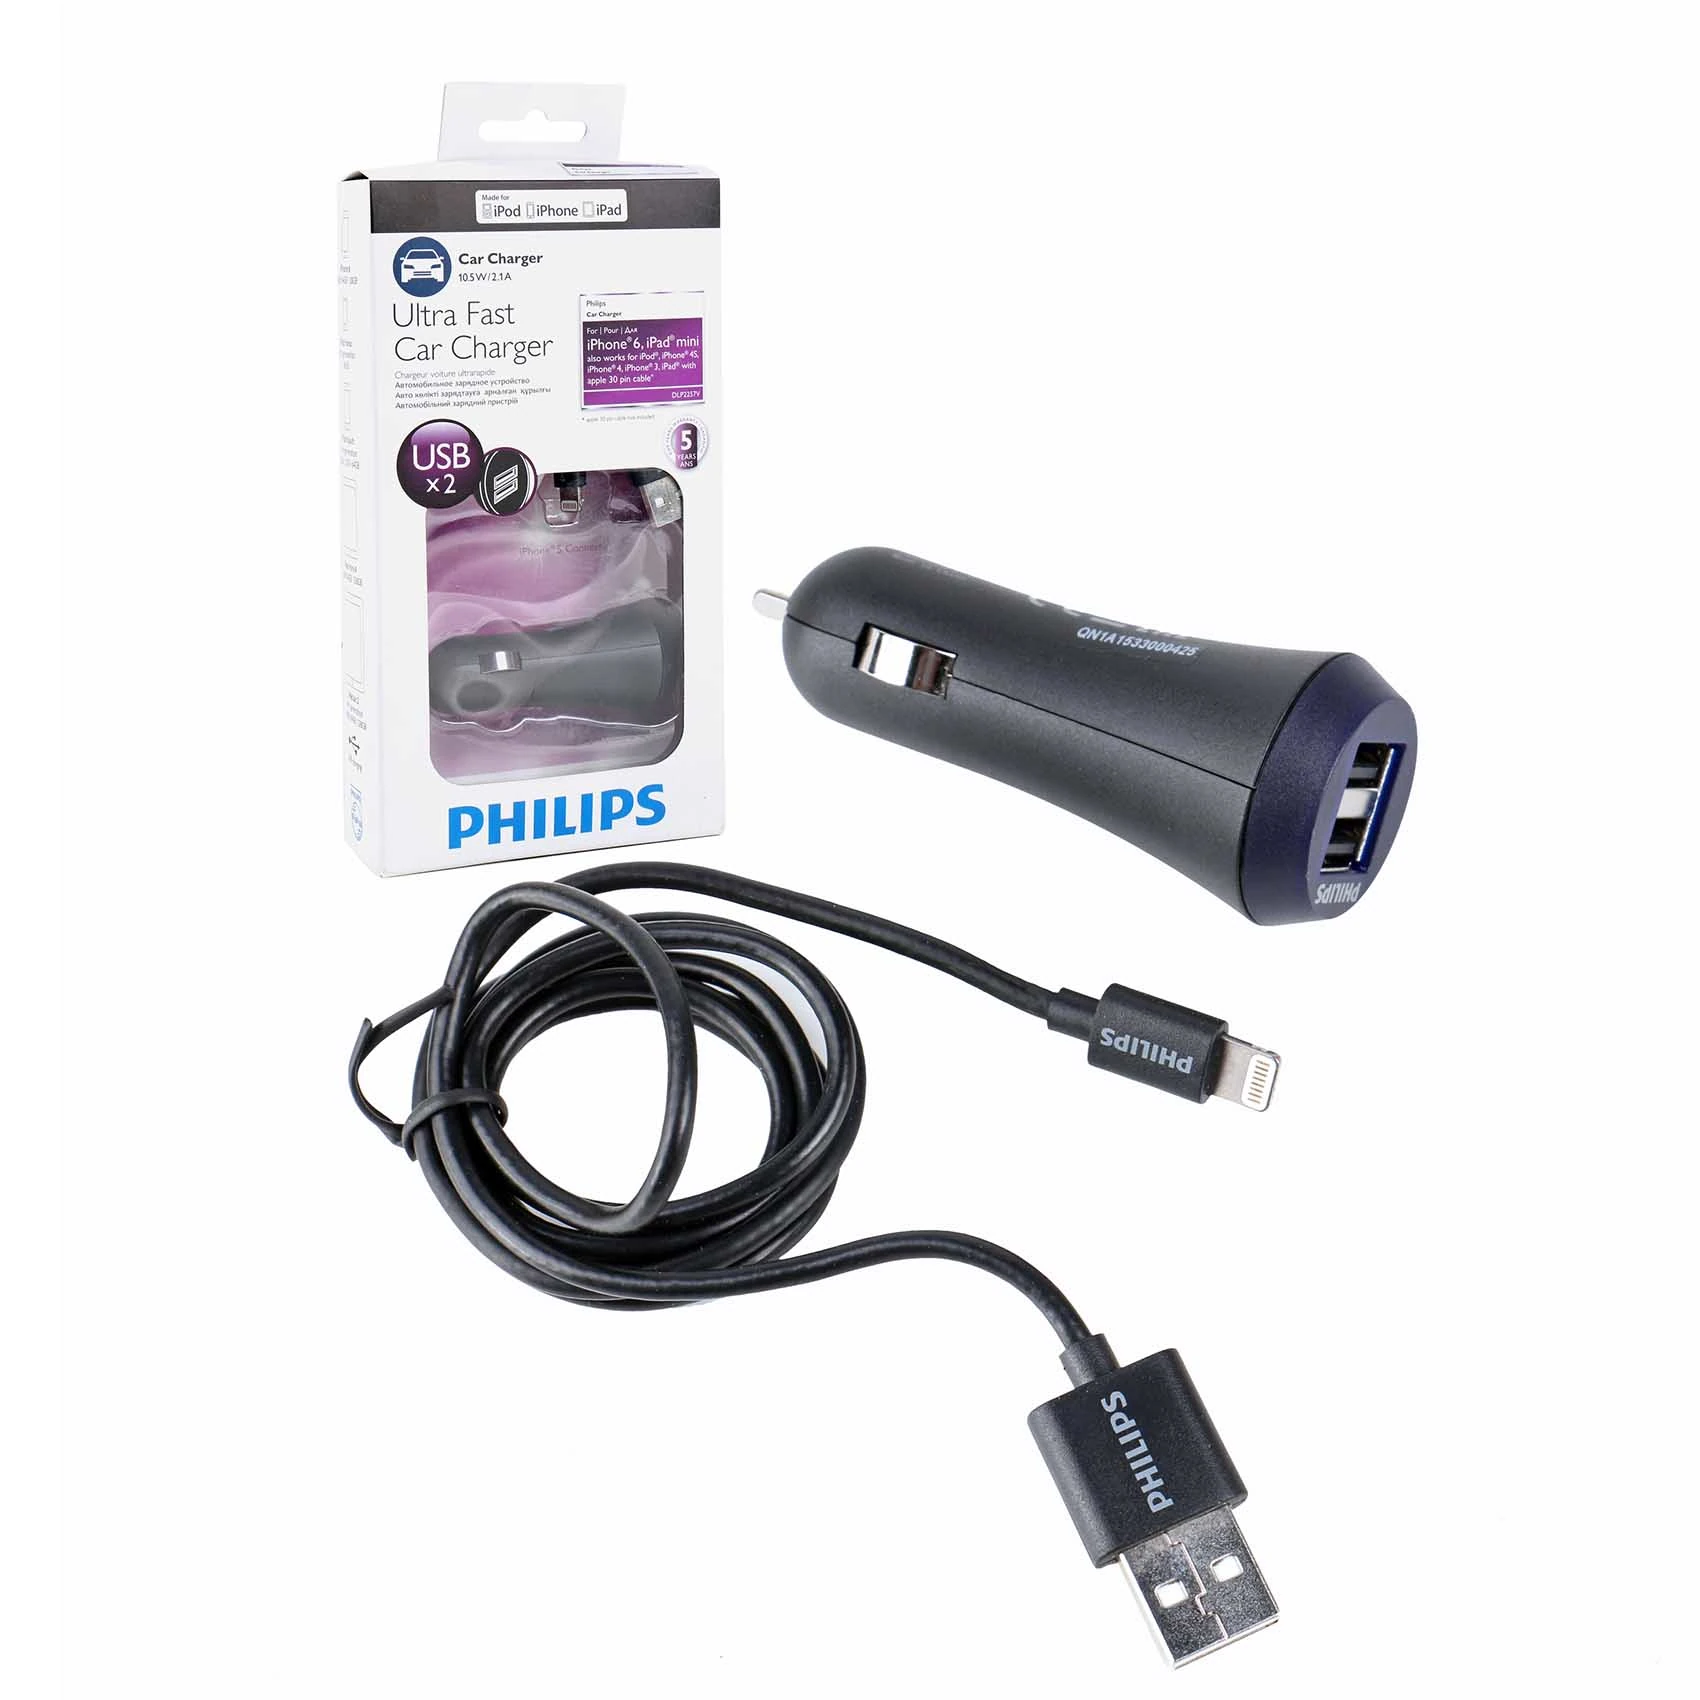 PHILIPS ULTRA FAST UNIVERSAL CAR CHARGER 2 USB PLUG WITH IPHONE CHARGING CABLE 10.5W-2.1A  IPHONE CABLE Lightning Cable DLP2257V-10 2553U-97